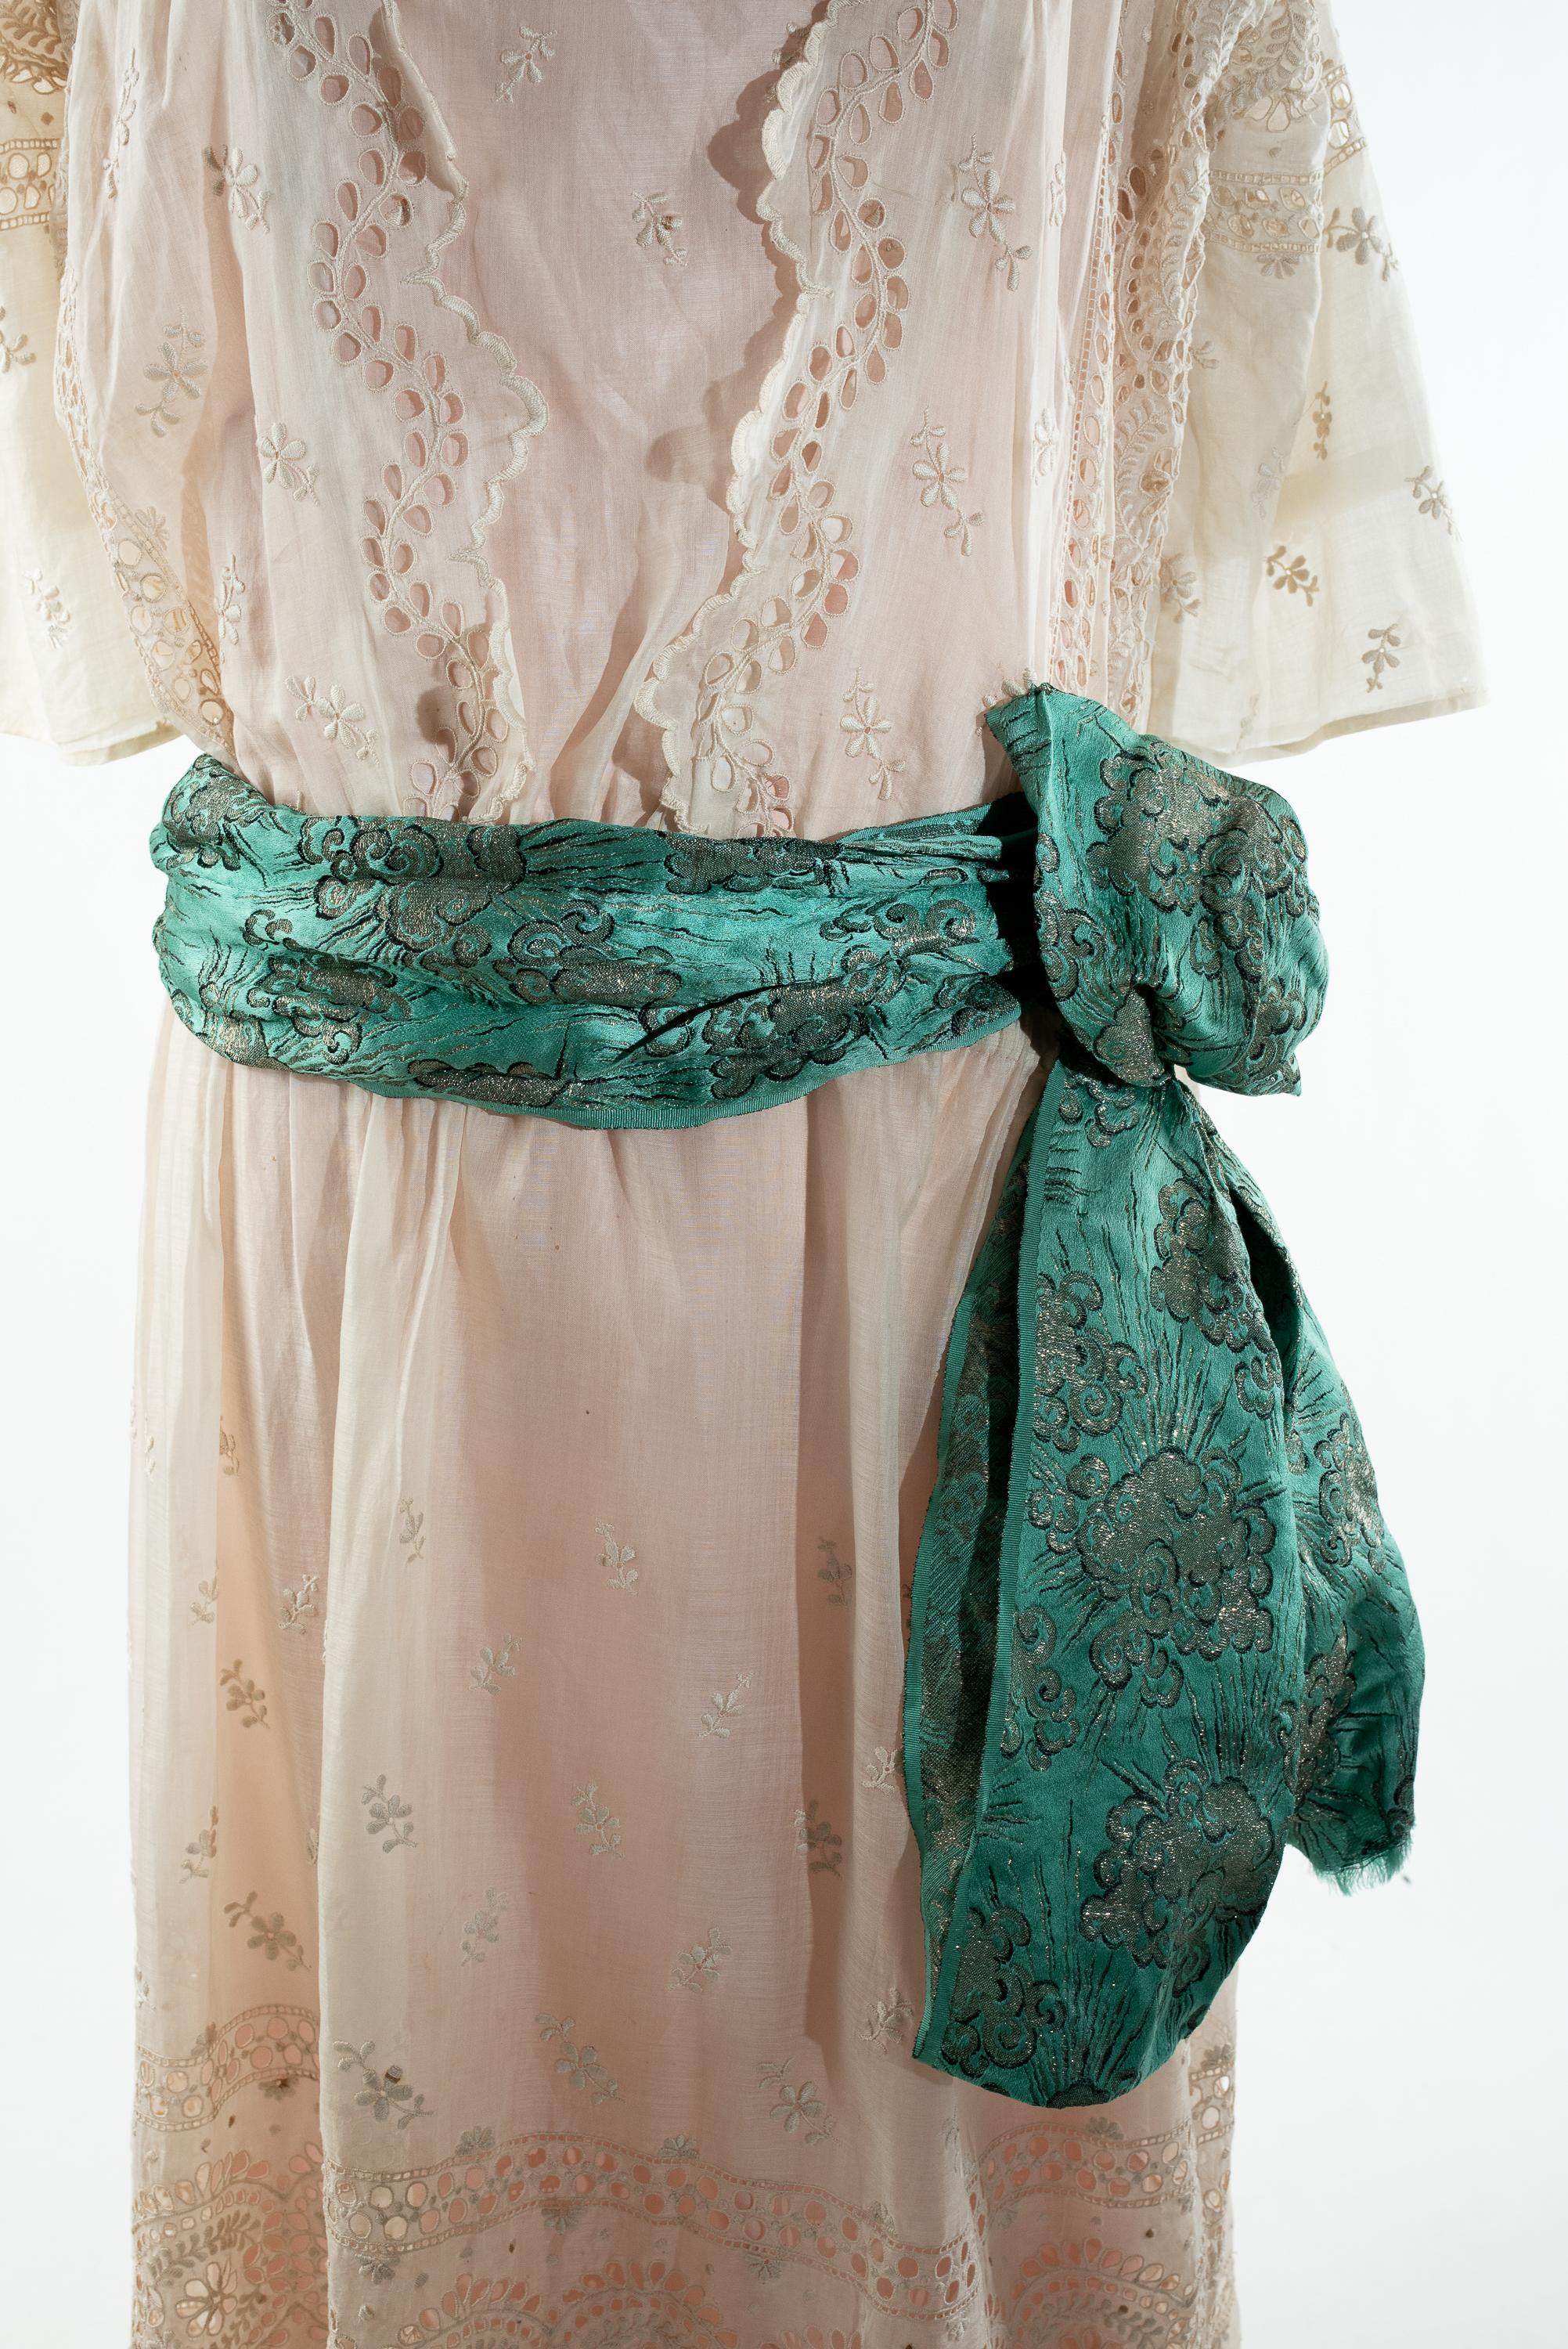 A silk pongee & White Embroidery Chiffon Summer Dress - France Circa 1920 For Sale 8